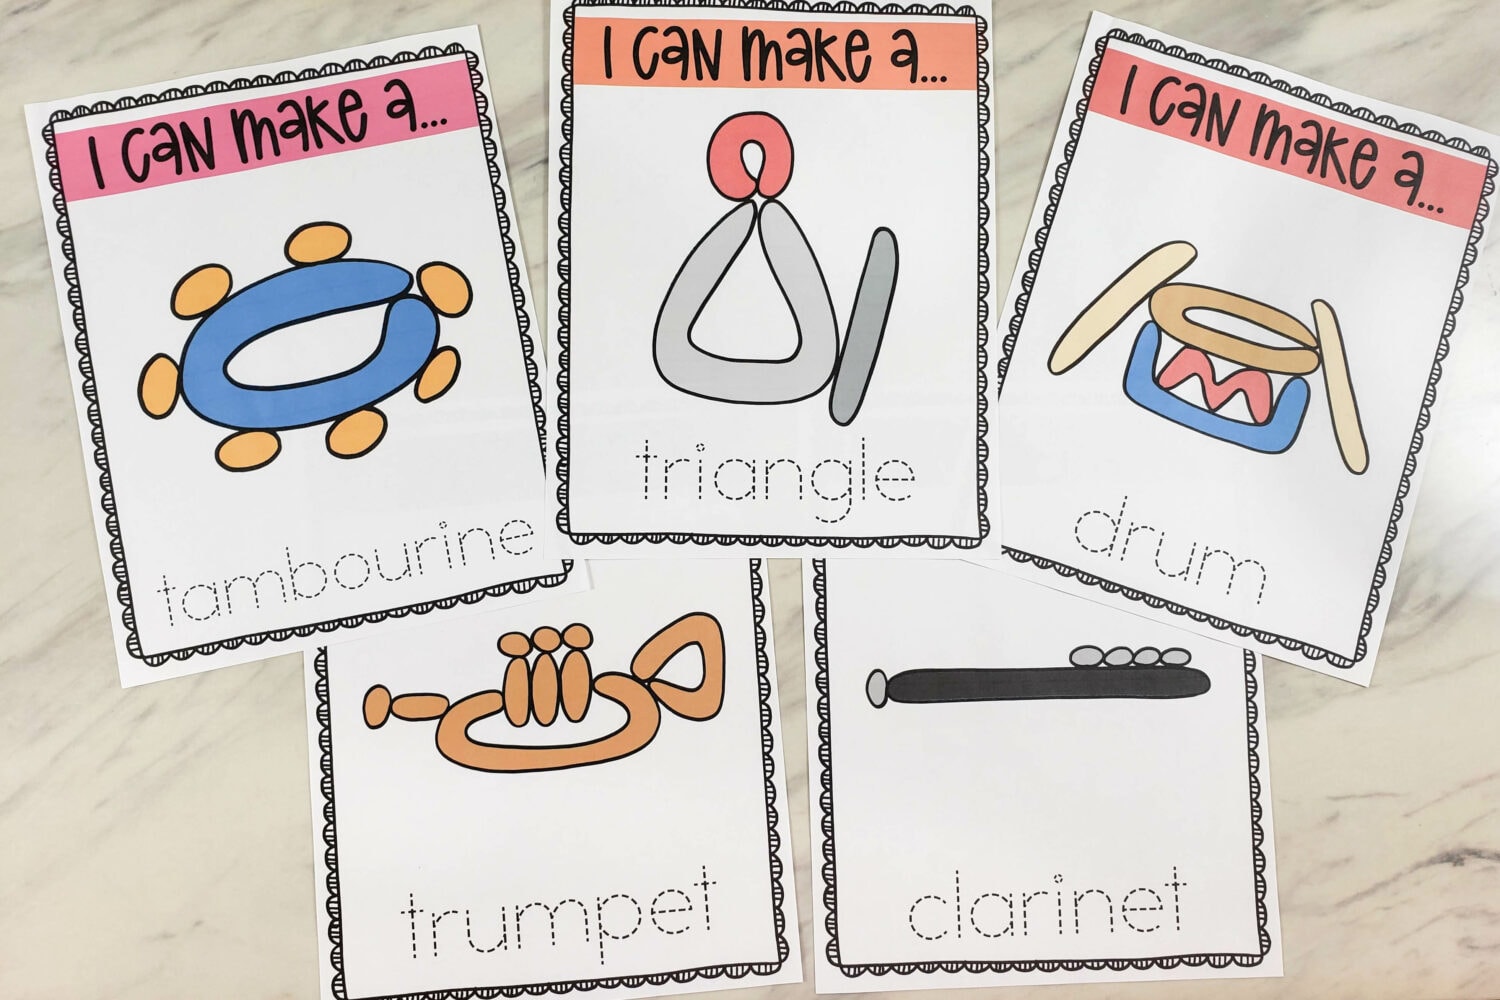 Musical Instruments Playdoh Mats Printable - Learn to identify and shape a variety of fun musical instruments using playdoh! Fun singing time idea for music leaders! Includes 12 different instruments and handwriting practice worksheet.